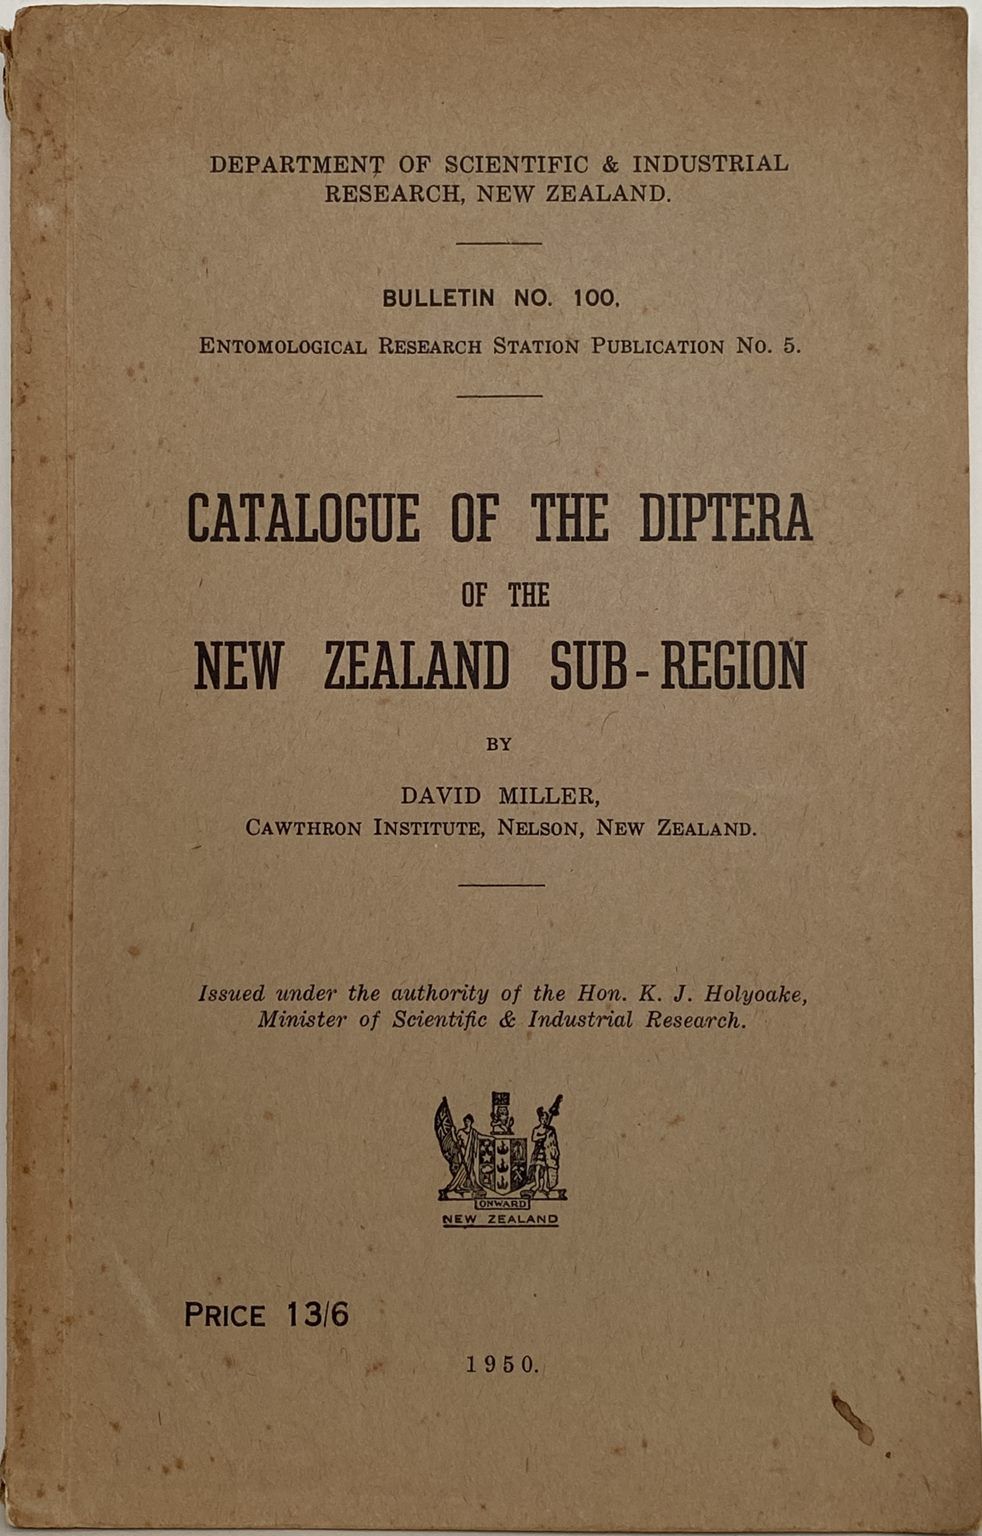 CATALOUGE of the DIPTERA of NEW ZEALAND